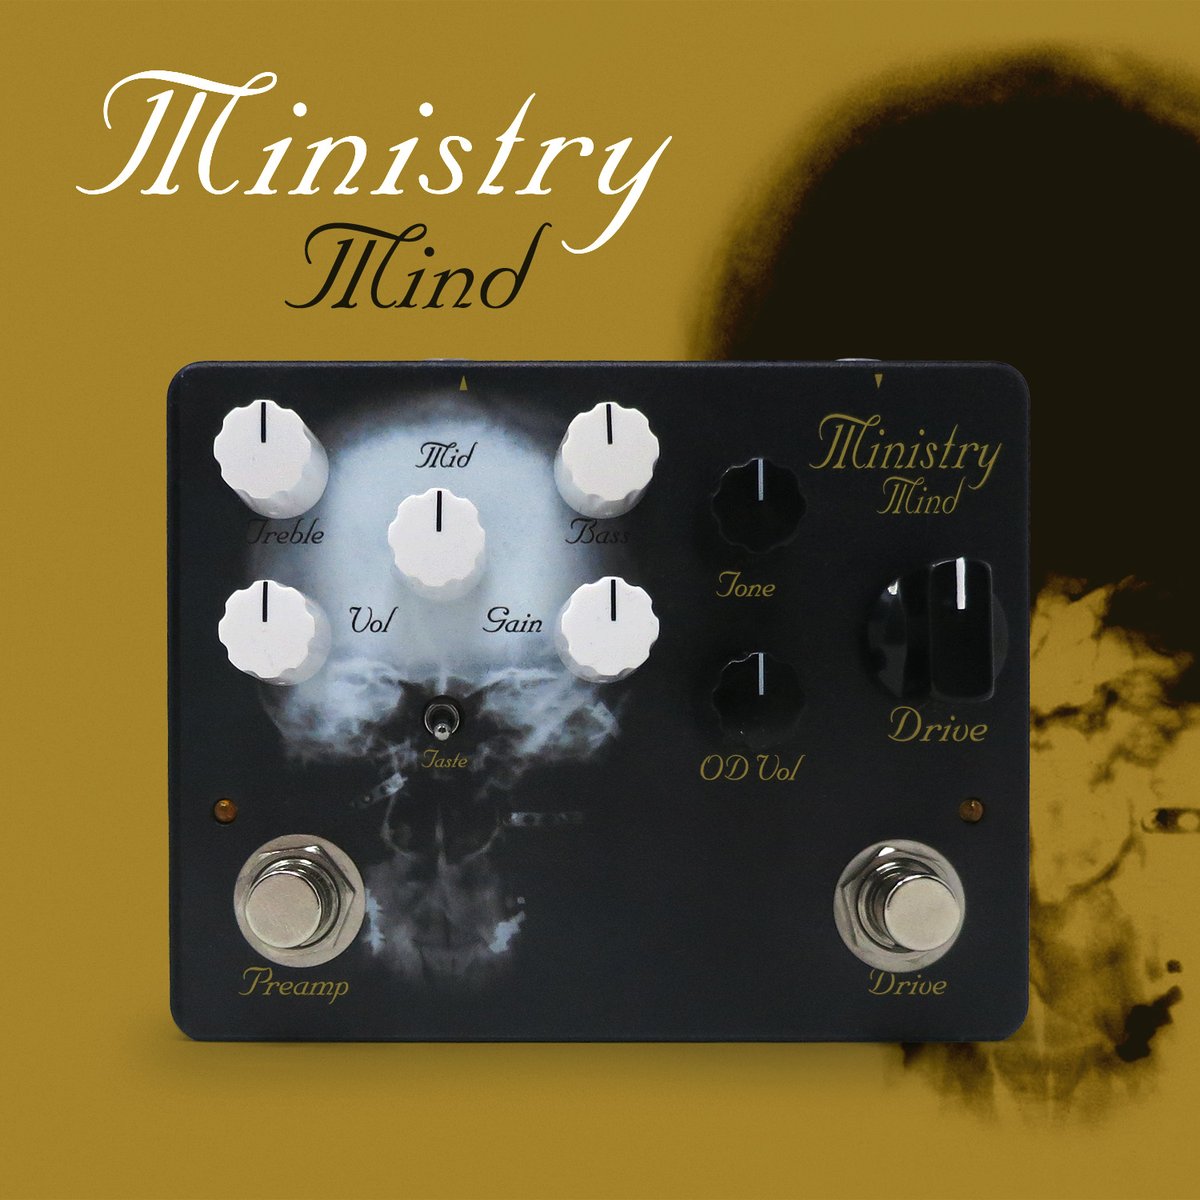 LIMITED custom made Ministry “Mind” pedal! Stage-ready, high-end audio gear that encapsulates our sound from The Mind era. 2-in-1 overdrive-and-amp pedal and it ships with a Certificate SIGNED by Al! Built and guitar-tested in the EU. ministrypedal.com 💀